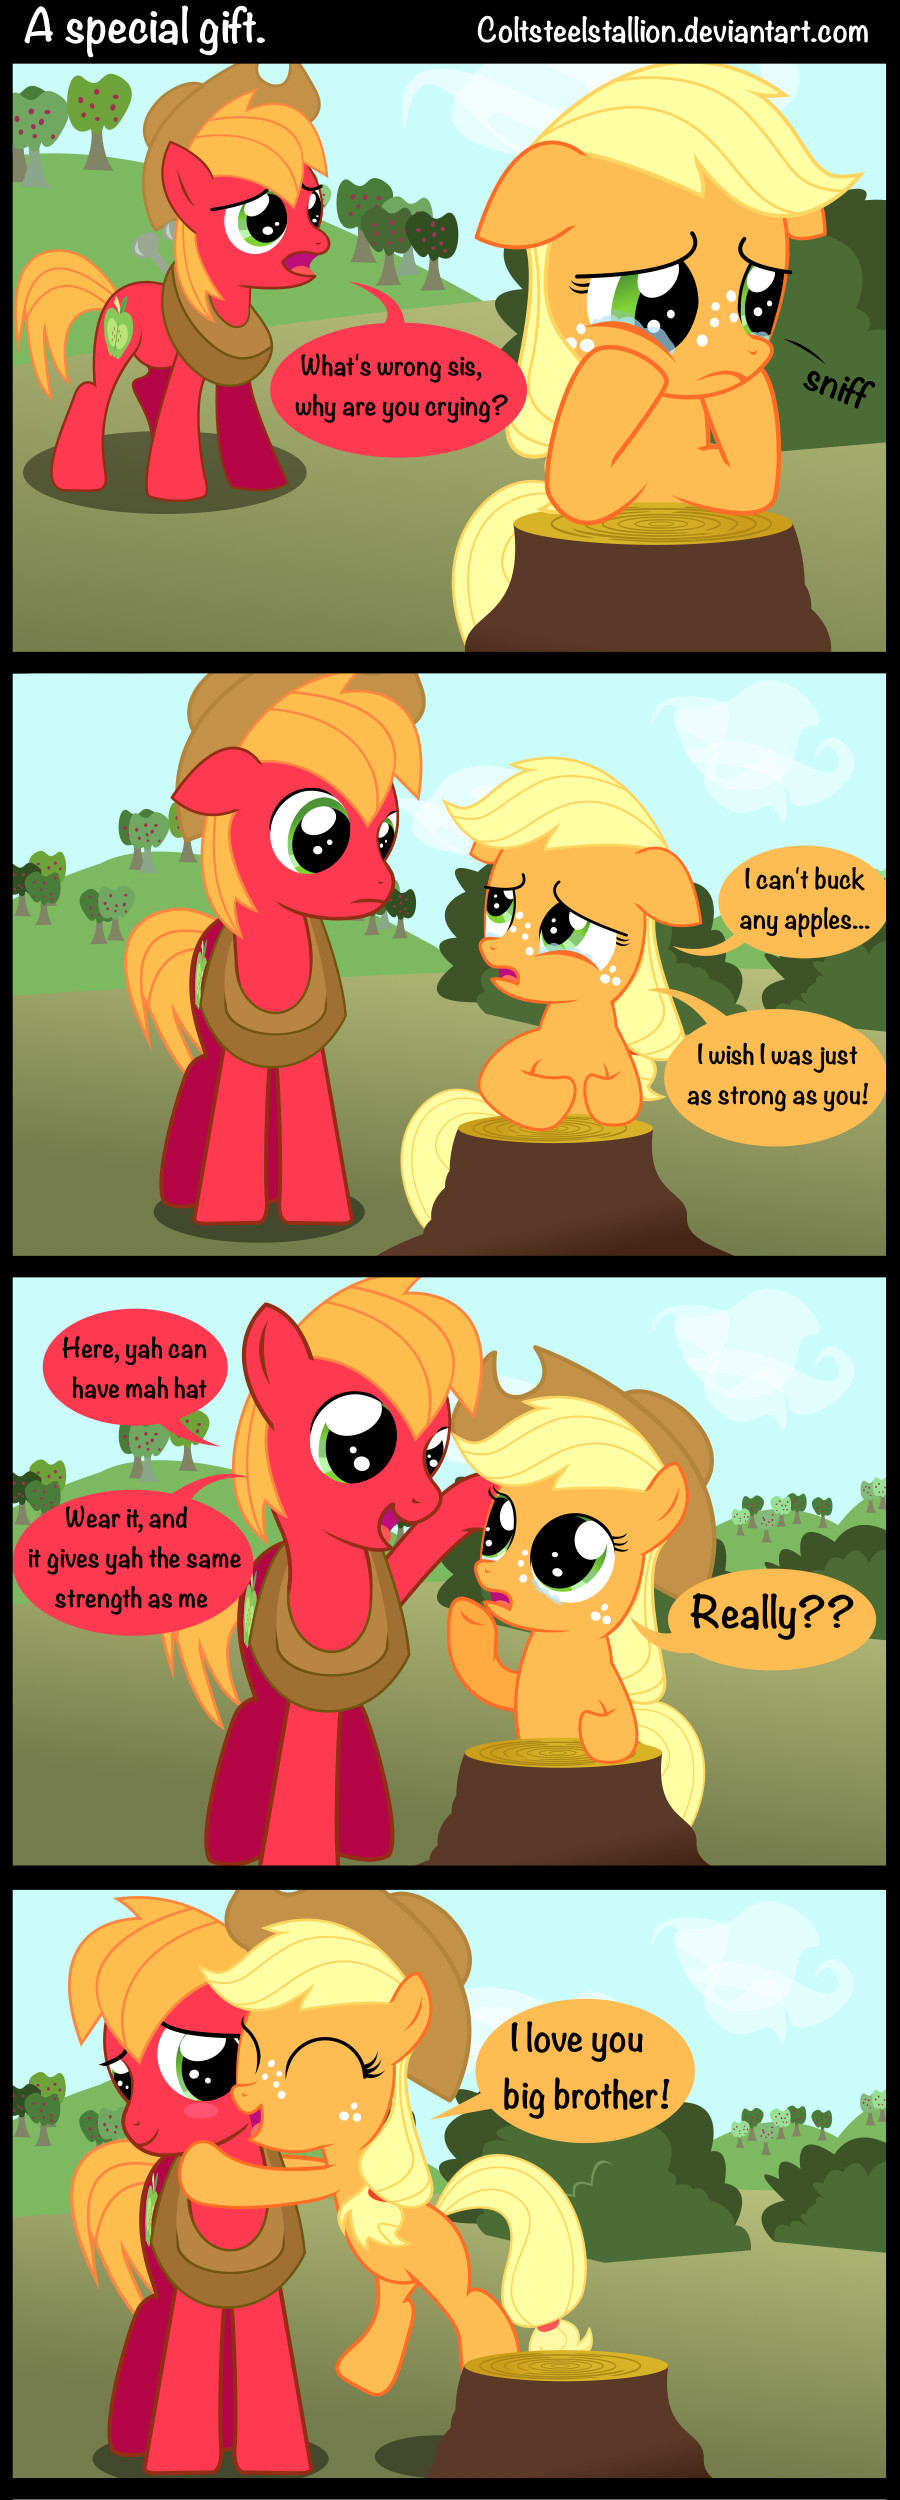 a_special_gift_by_coltsteelstallion-d5bj